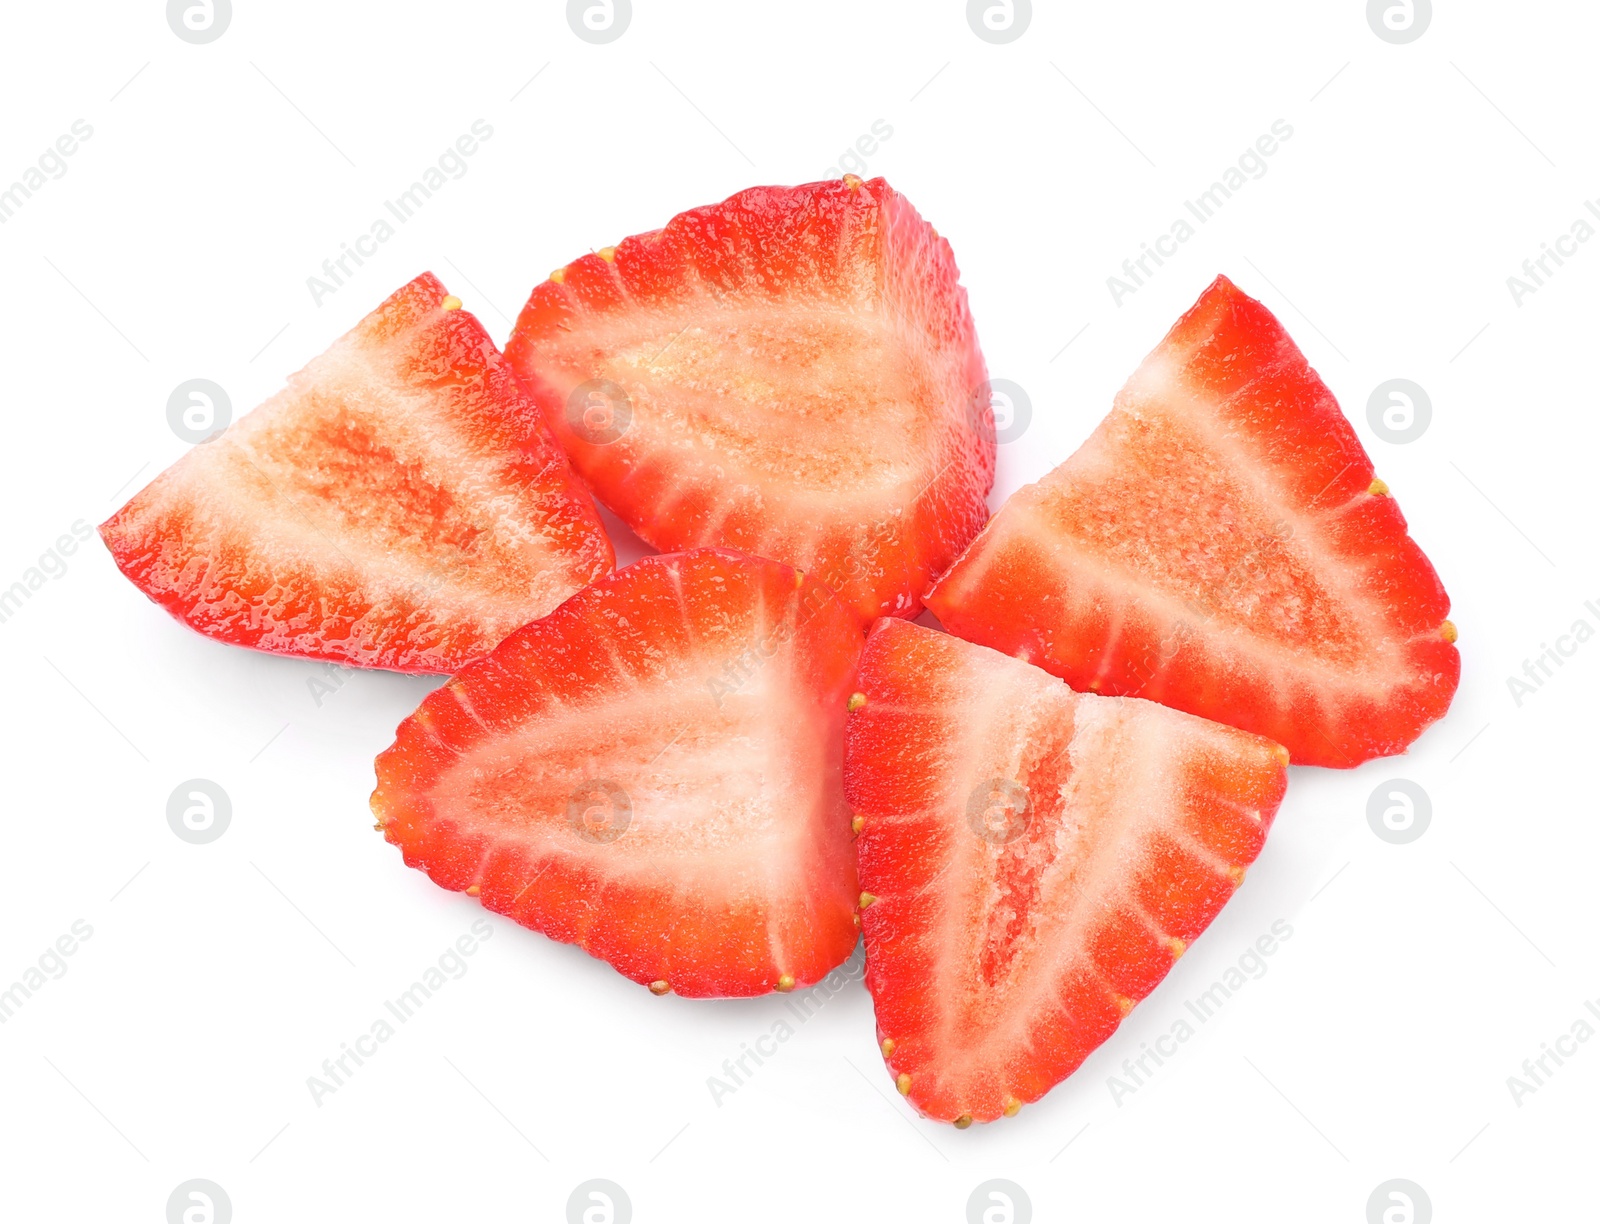 Photo of Halves of delicious fresh strawberries on white background, top view